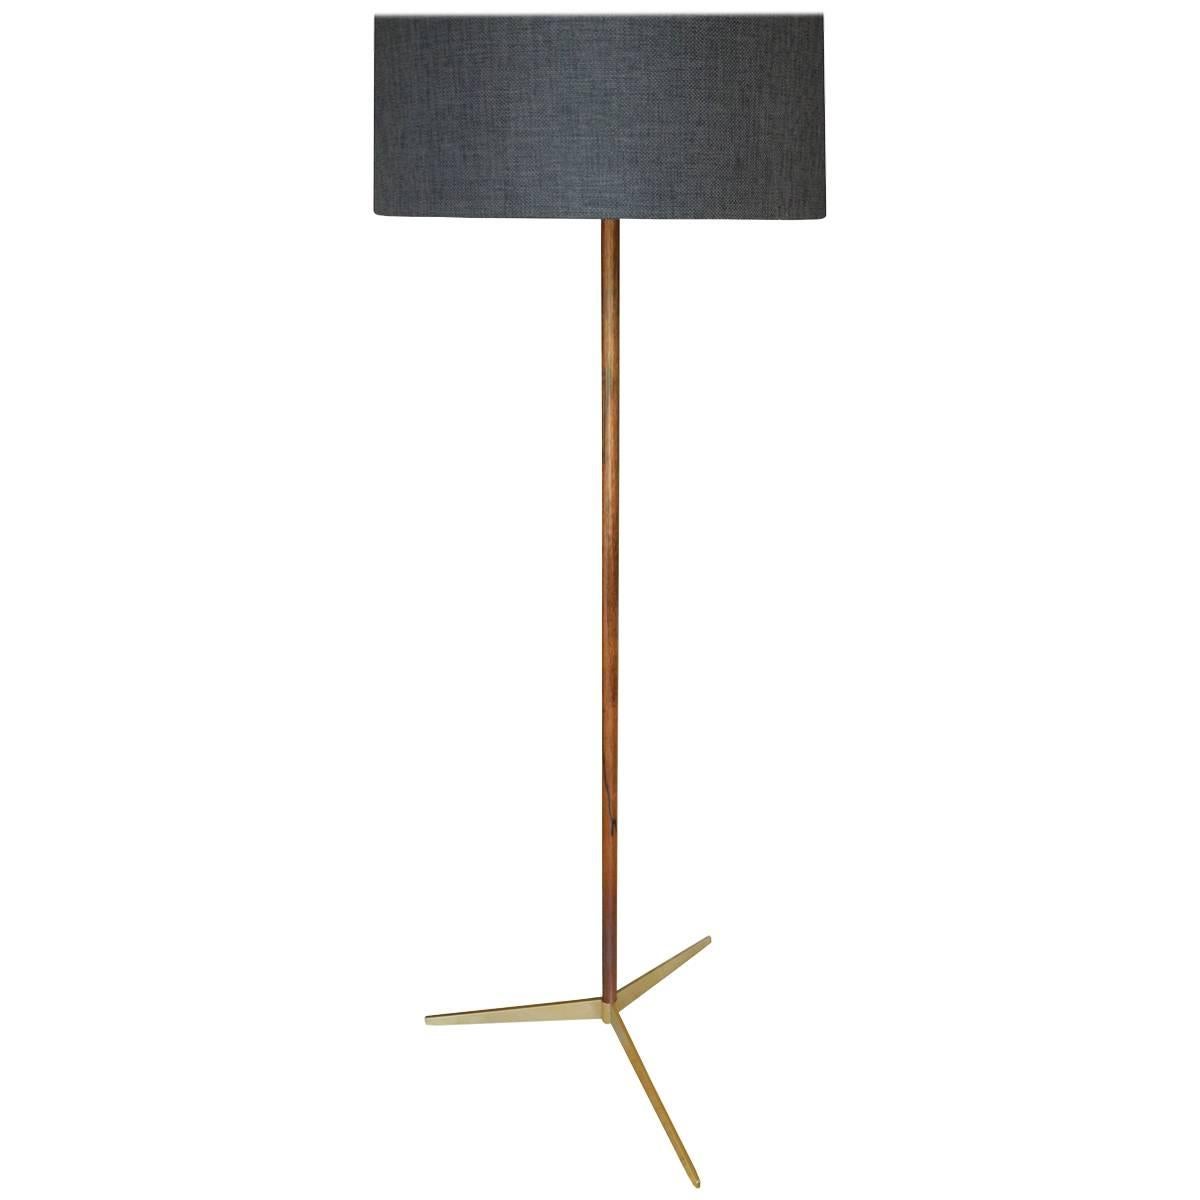 Danish Modern Rosewood and Brass Tripod Floor Lamp with Charcoal Burlap Shade For Sale